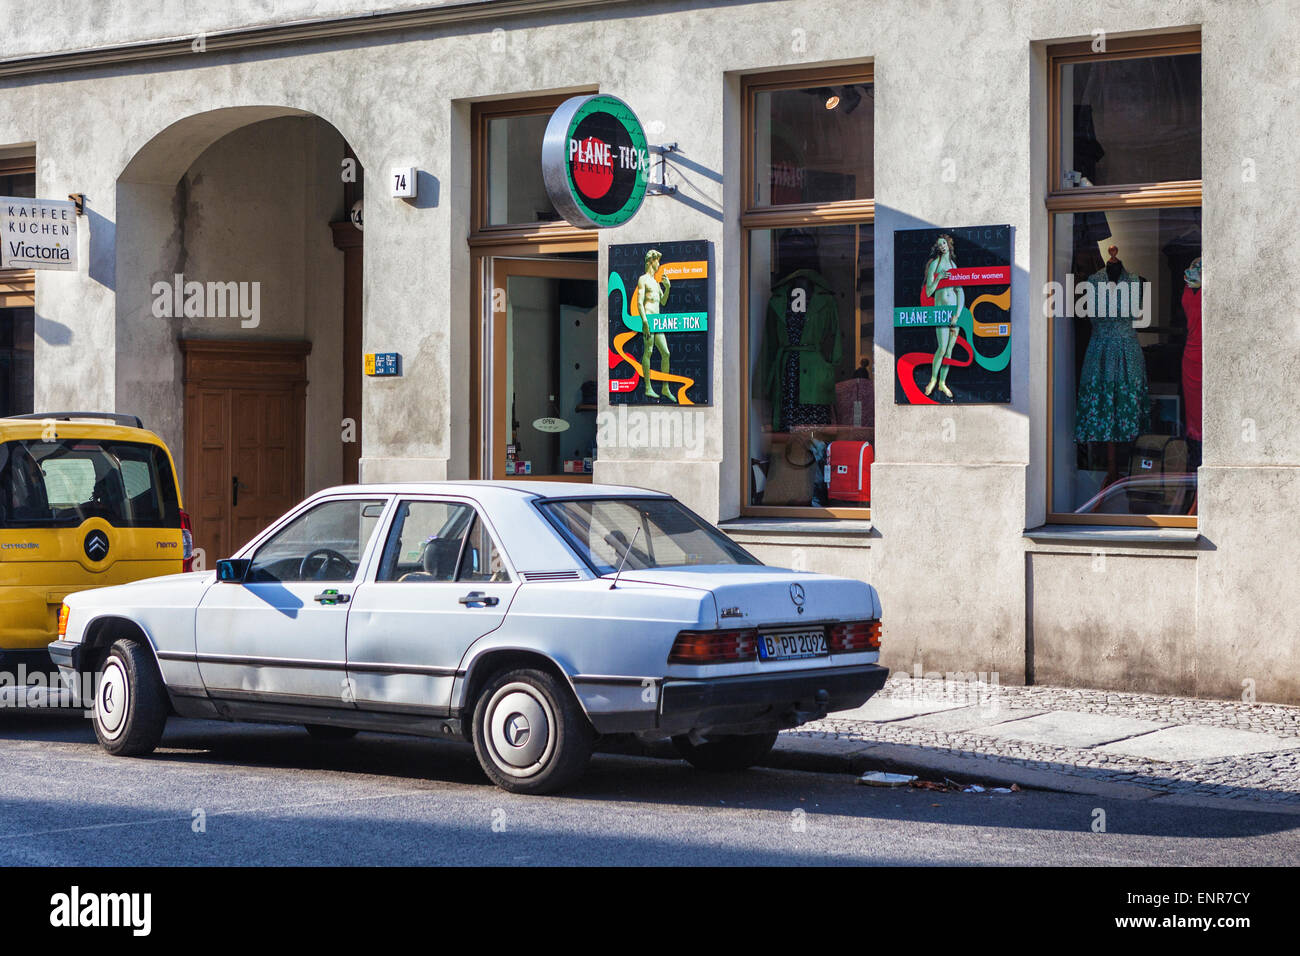 Plane-Tick Trendy fashion shop for men and women exterior and old dented Mercedes  Benz car, Mitte Berlin Stock Photo - Alamy